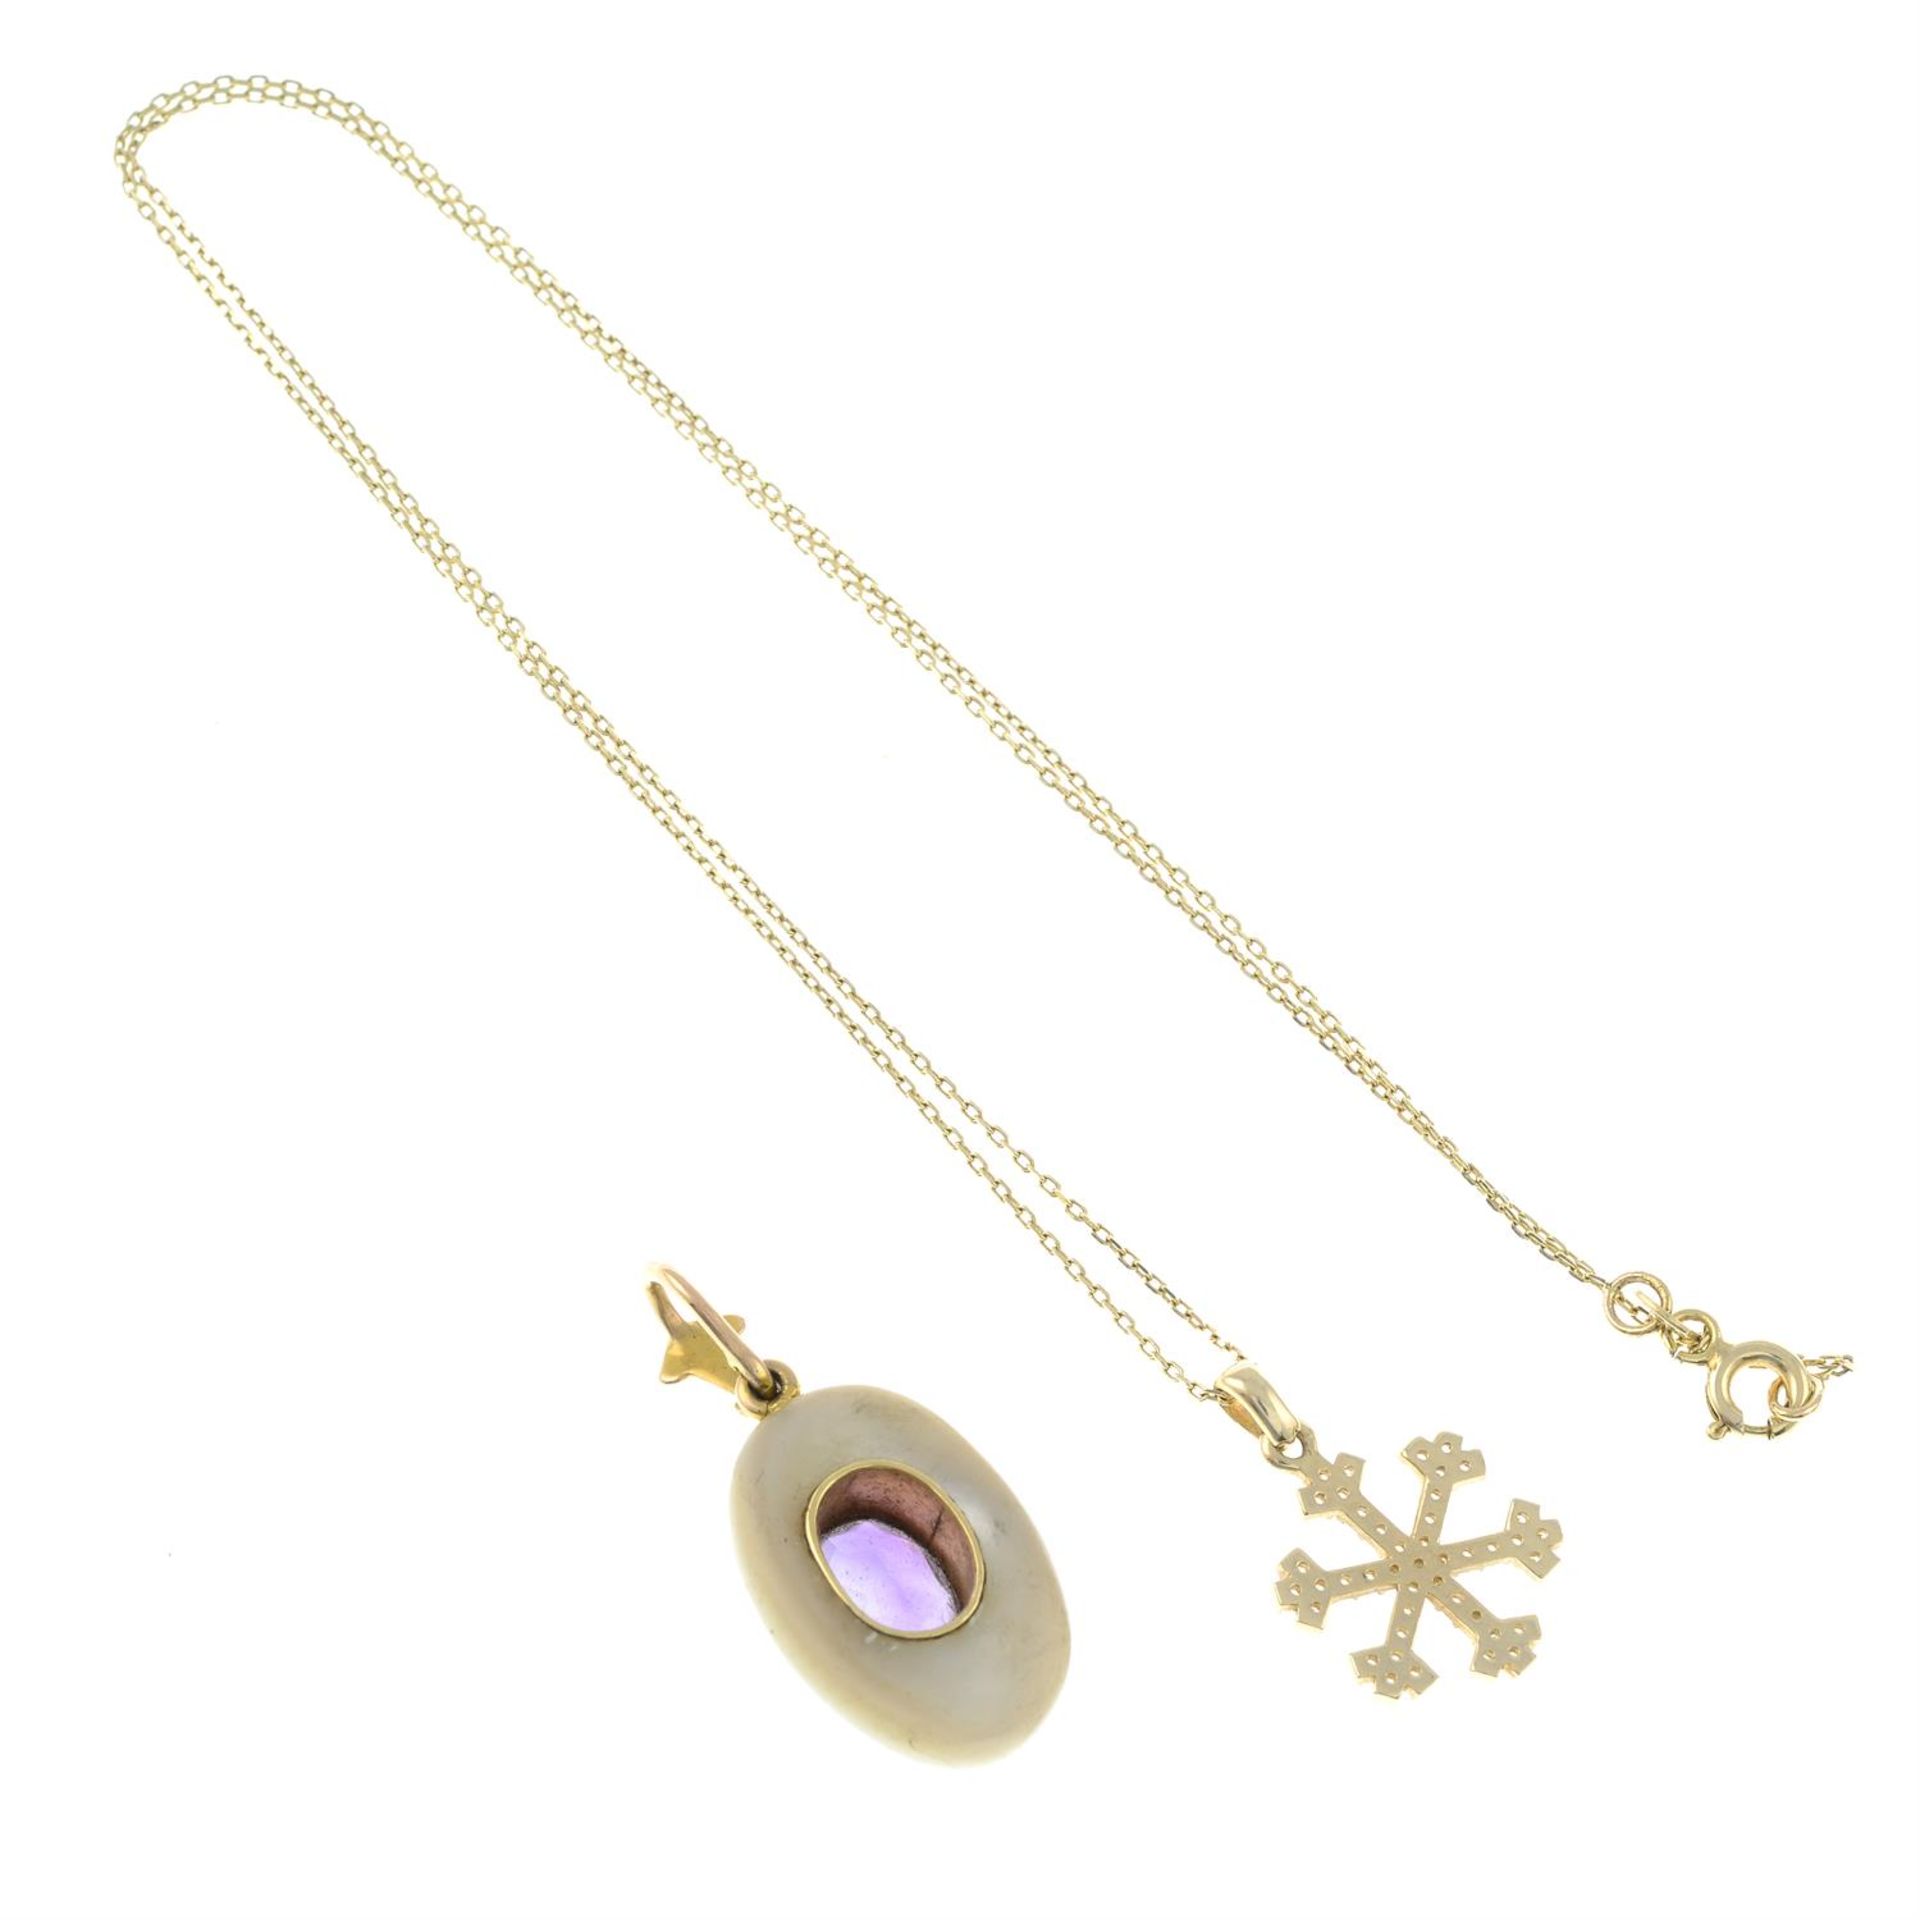 A cubic zirconia snowflake pendant, with chain and an amethyst and mother-of-pearl pendant. - Image 2 of 2